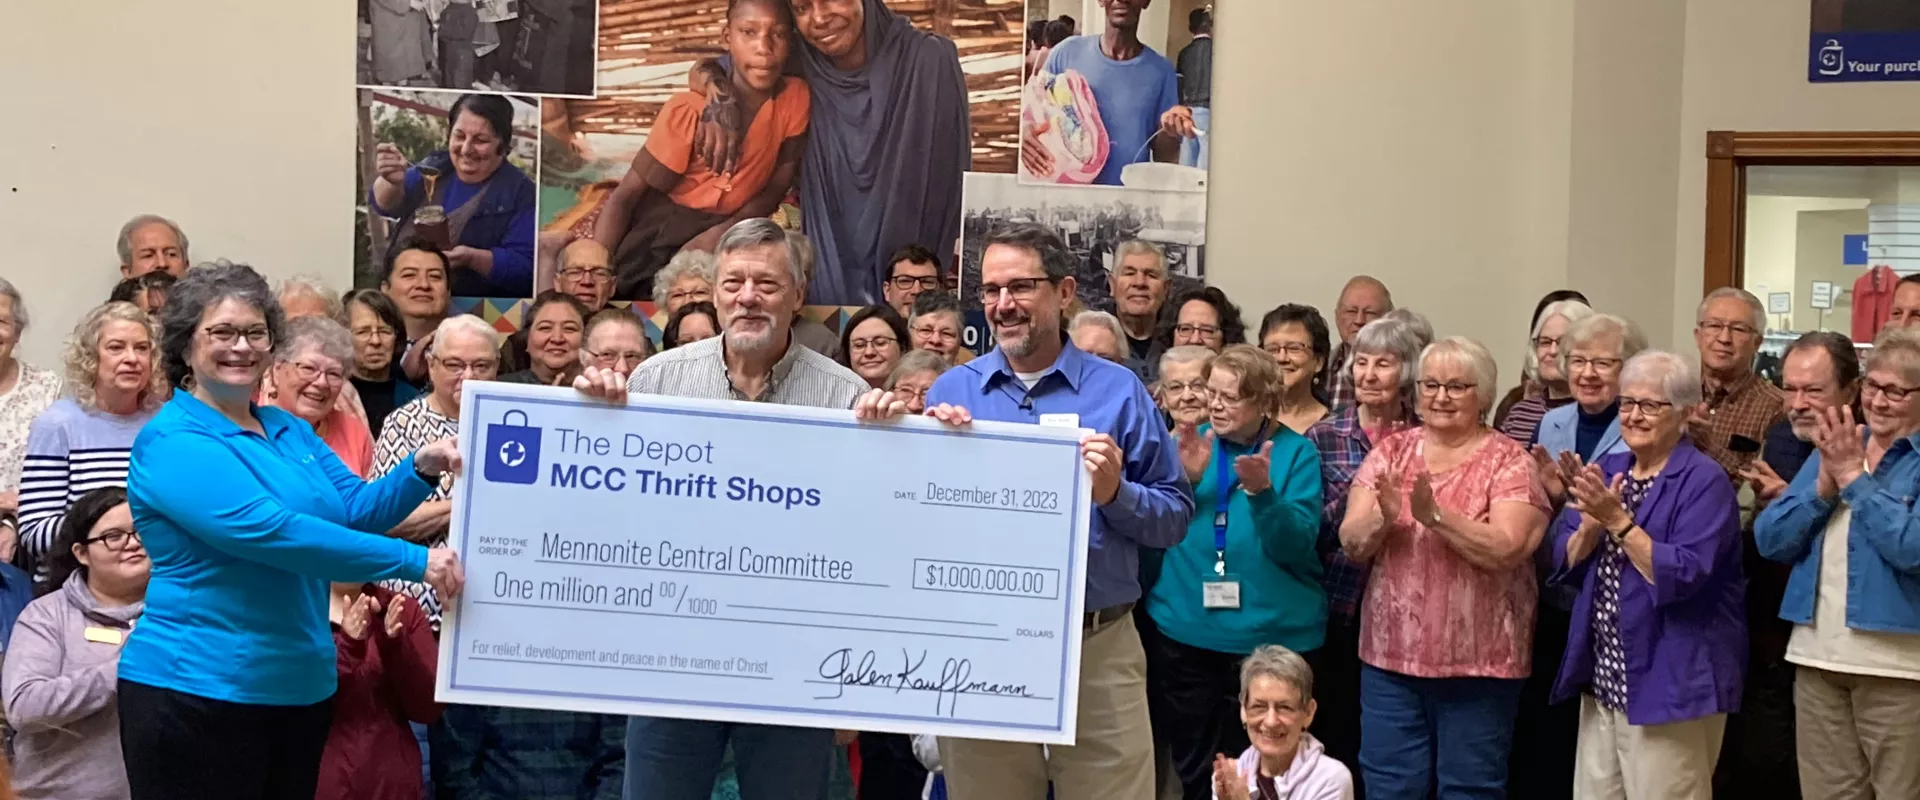 Staff and volunteers at The Depot thrift shop presenting a $1 million check.